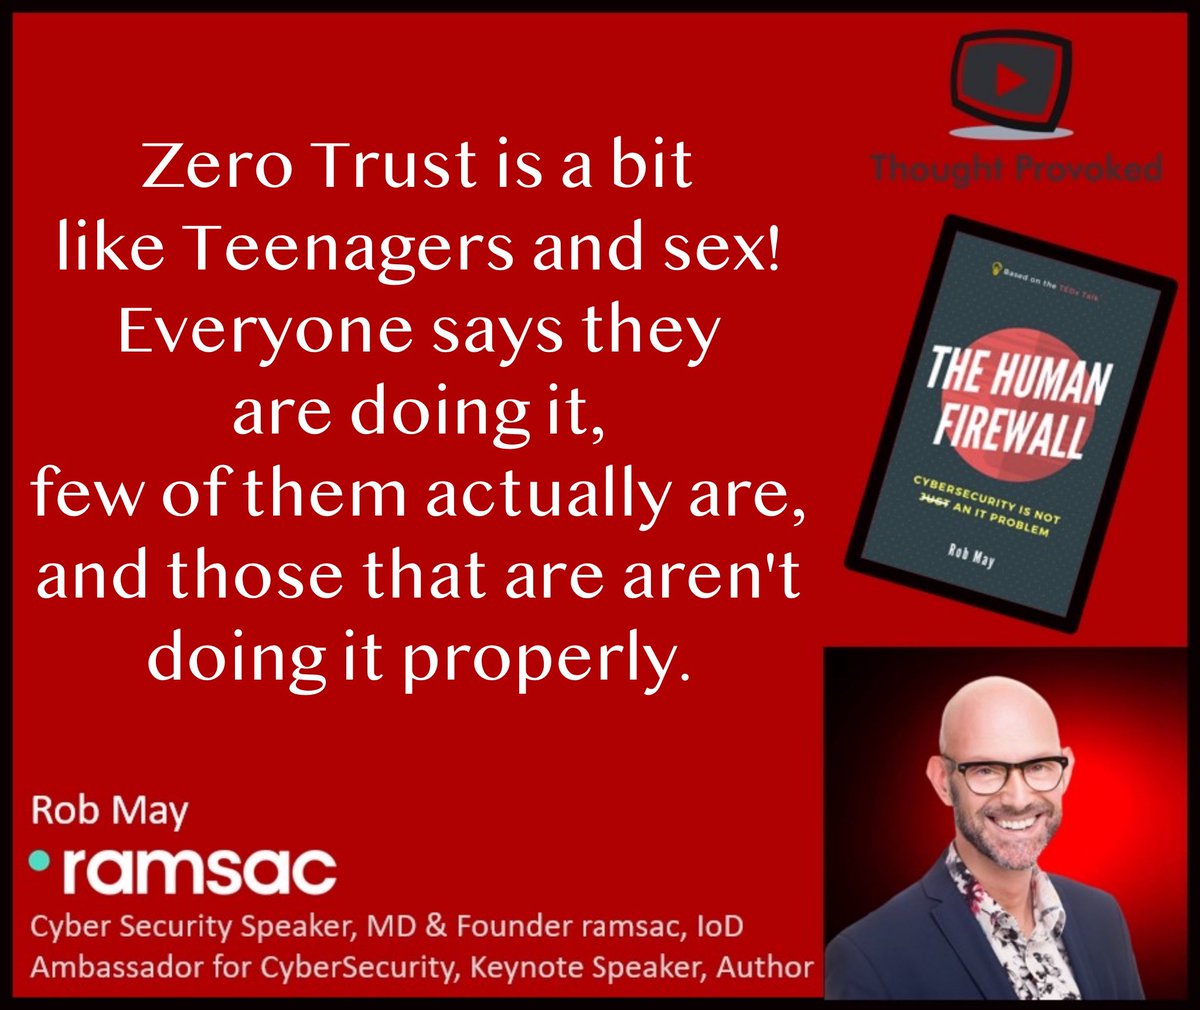 ⭕️ #ZeroTrust is a bit like teenagers and sex! Everyone says they are doing it, few of them actually are, and those that are aren't doing it properly! #CybersecurityAwarenessMonth